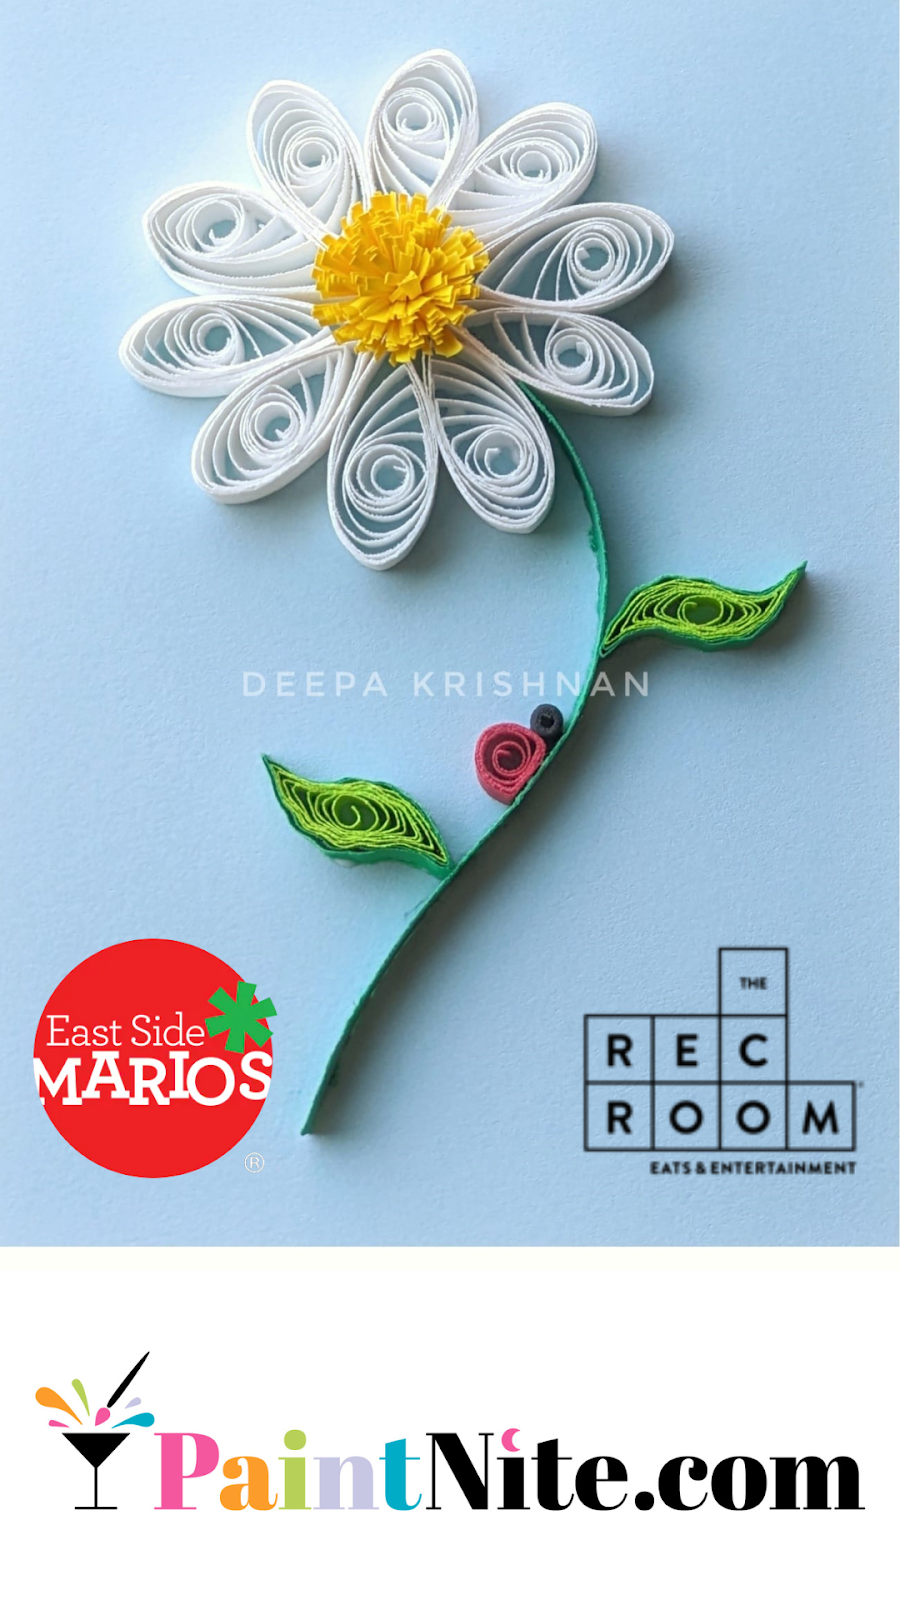 Paper Quilling Workshop at The Rec Room and EastSide Marios